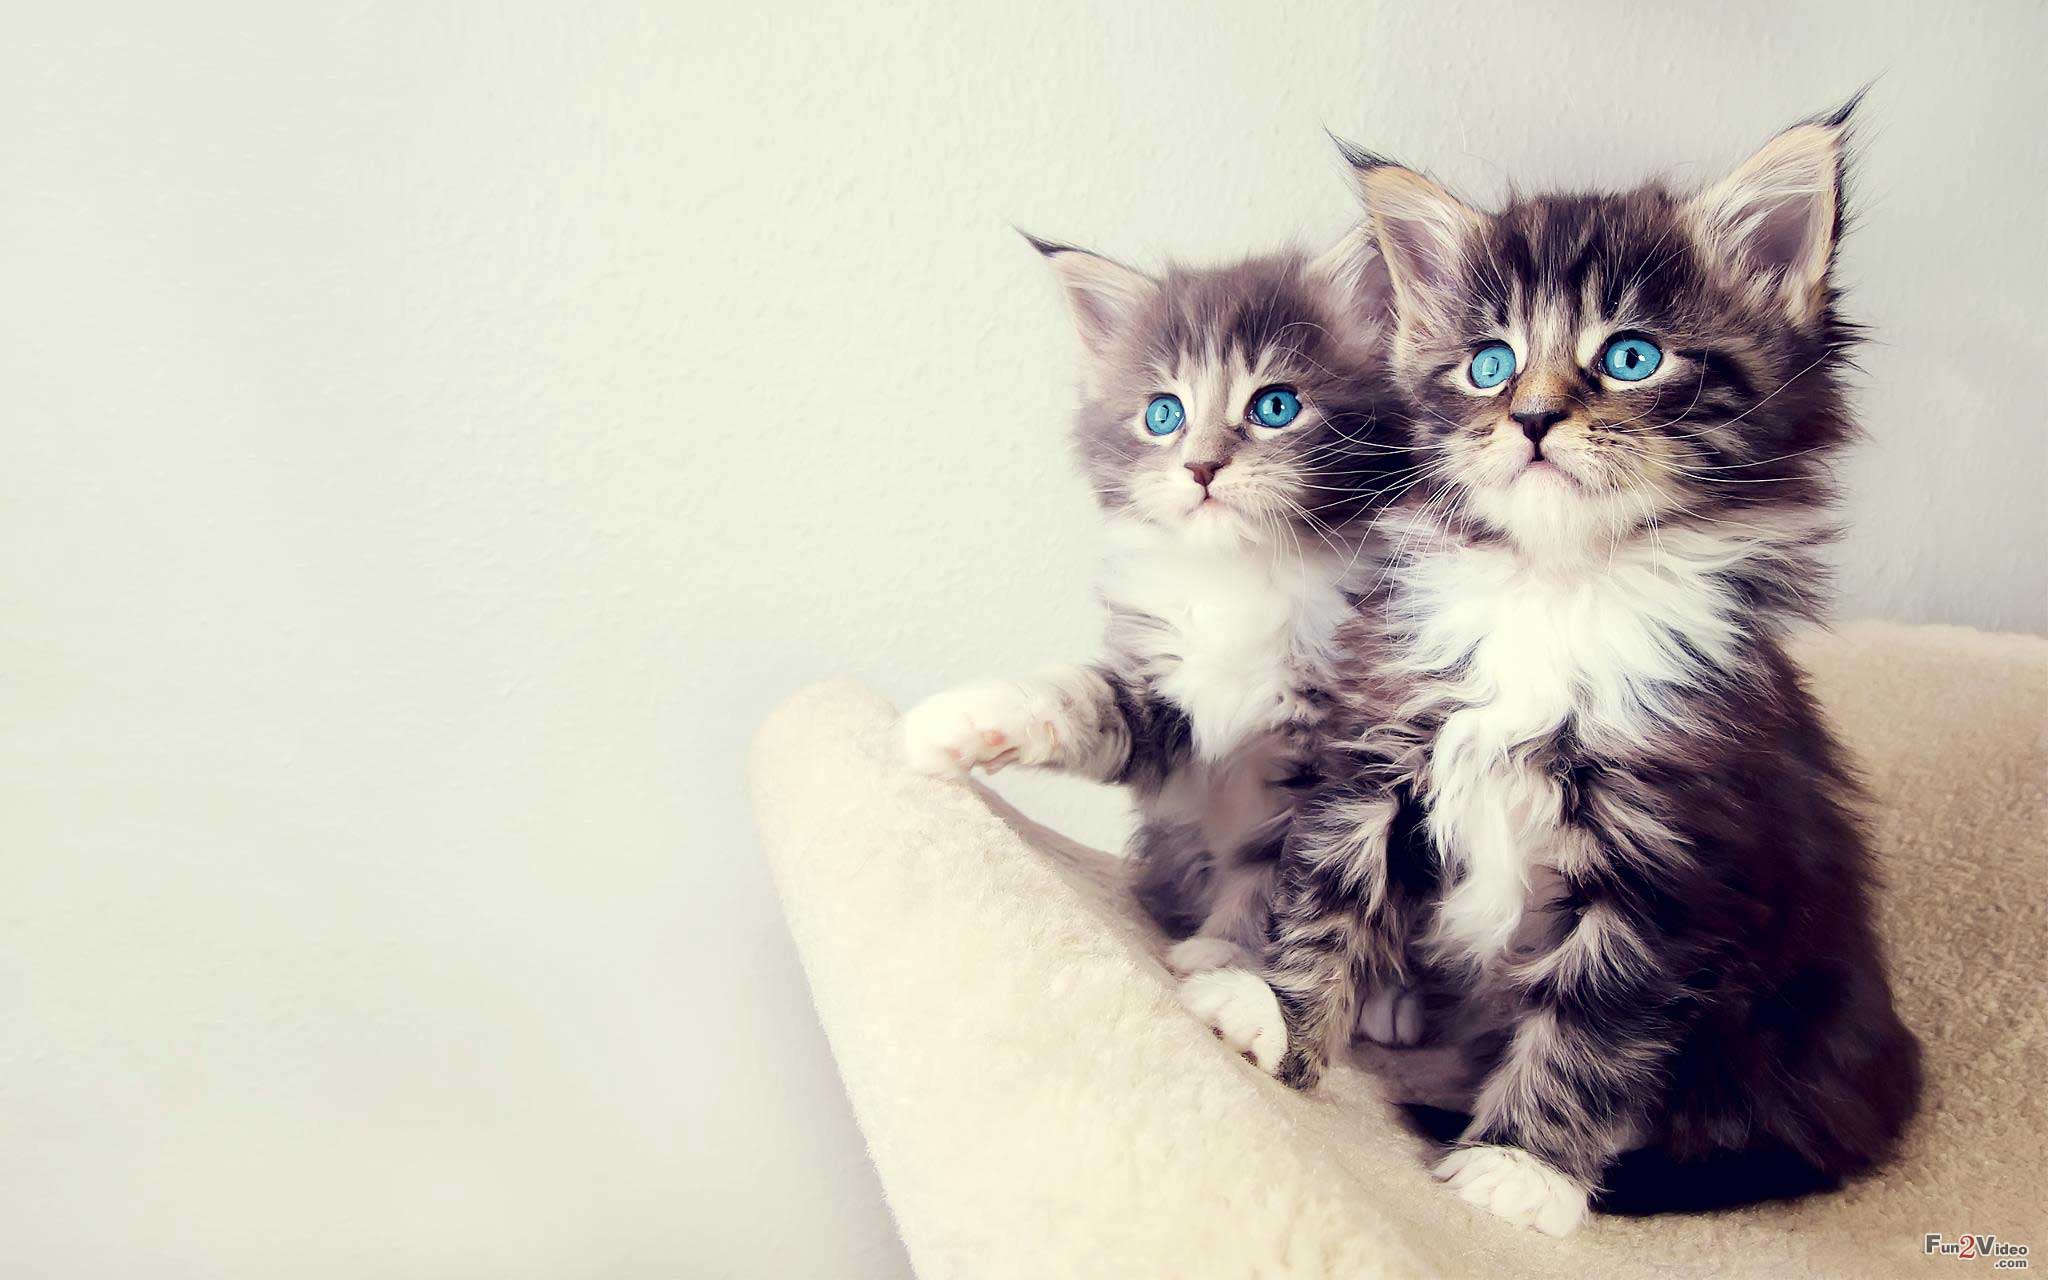 Beautiful Cute Cats Wallpapers Hd Pictures Live Hd - Cute Cats Images Hd - HD Wallpaper 